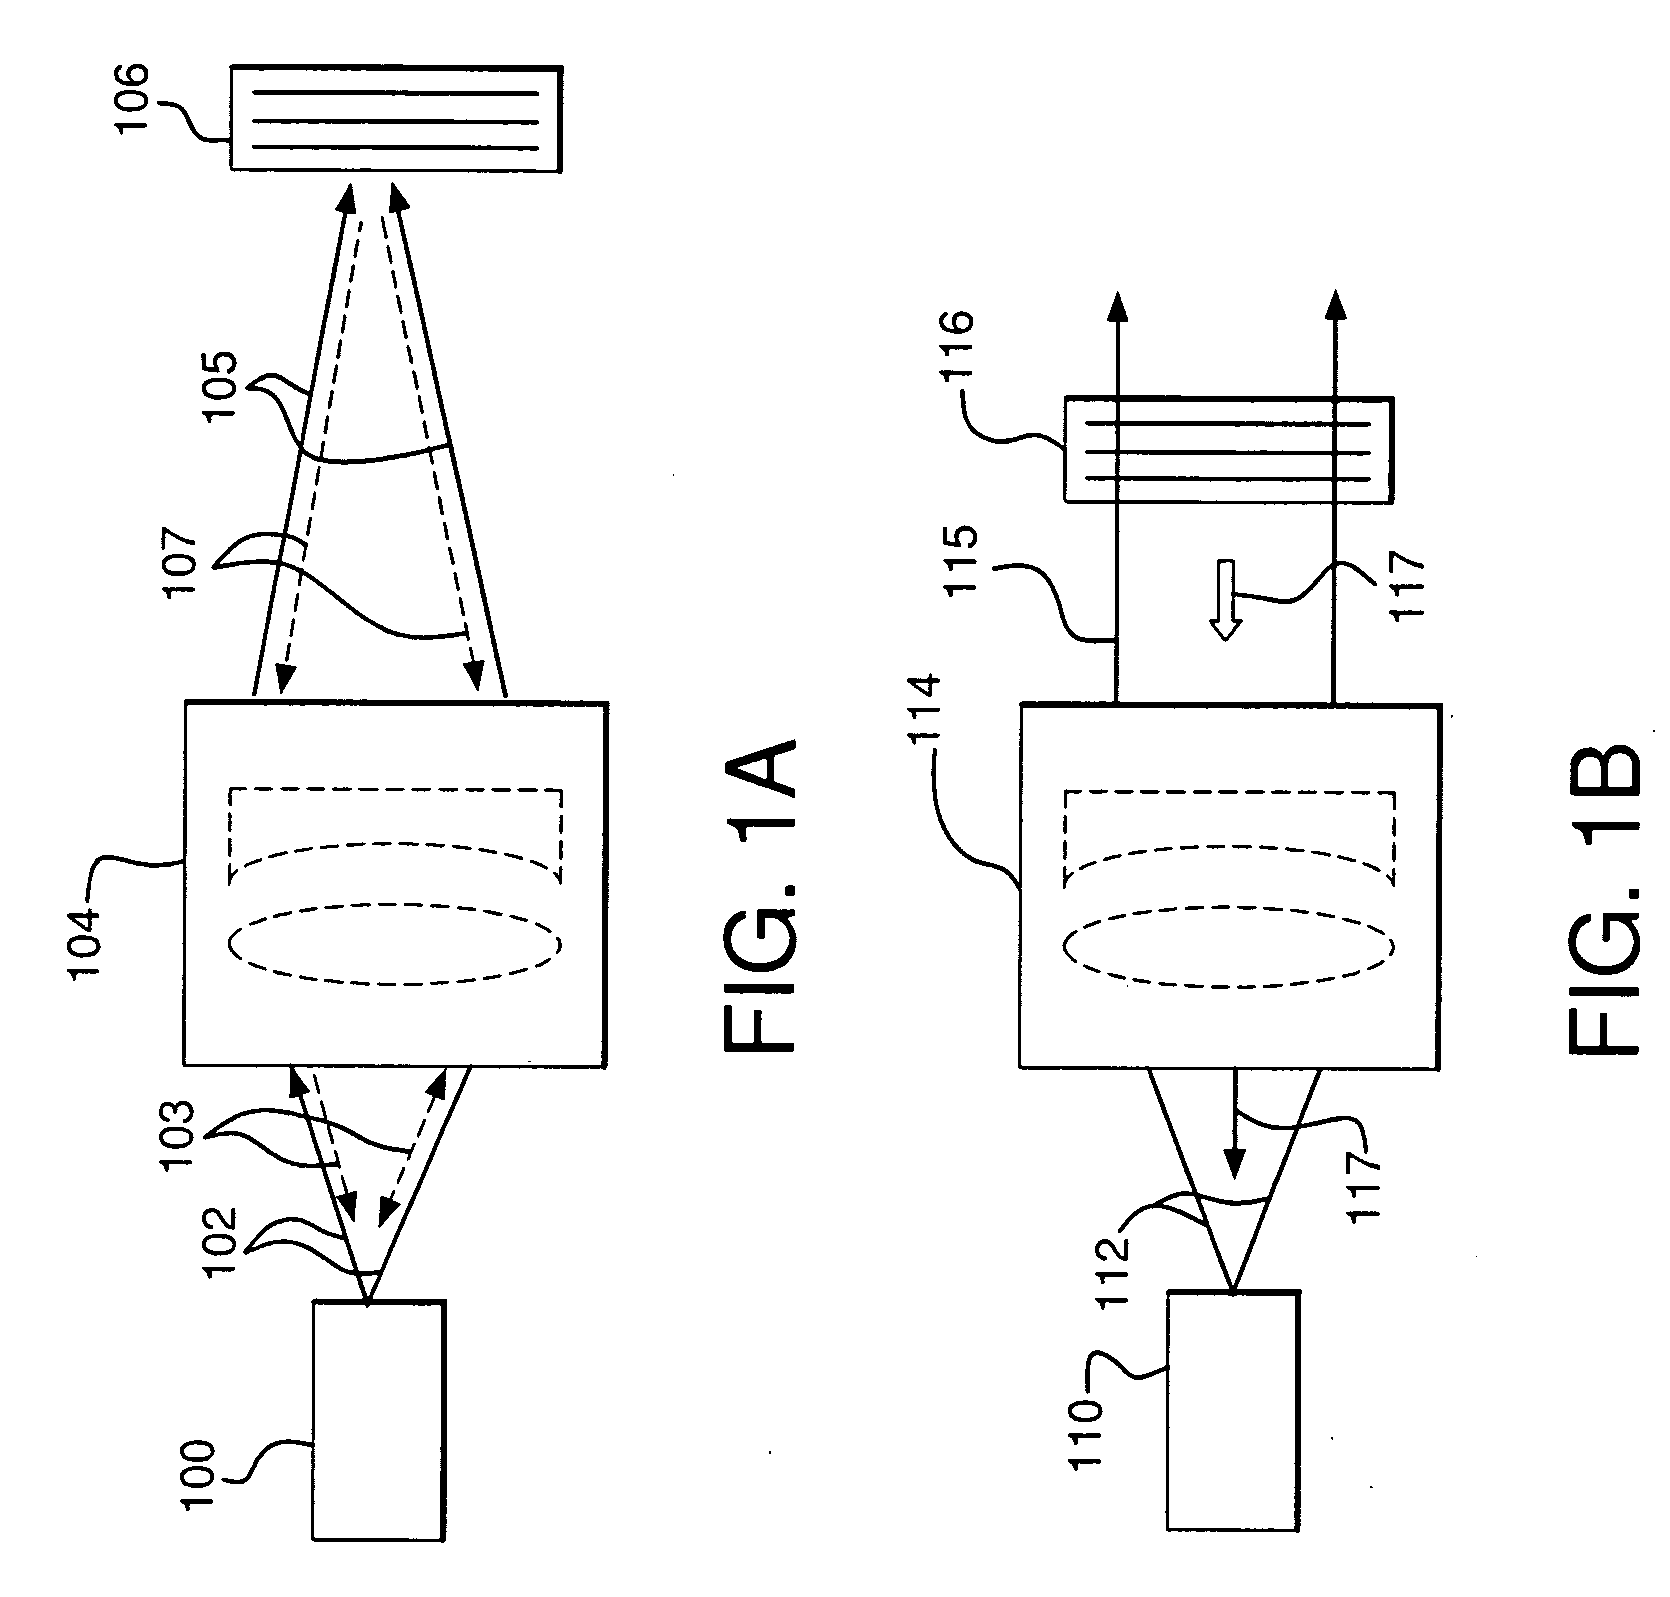 Apparatus and methods for altering a characteristic of a light-emitting device